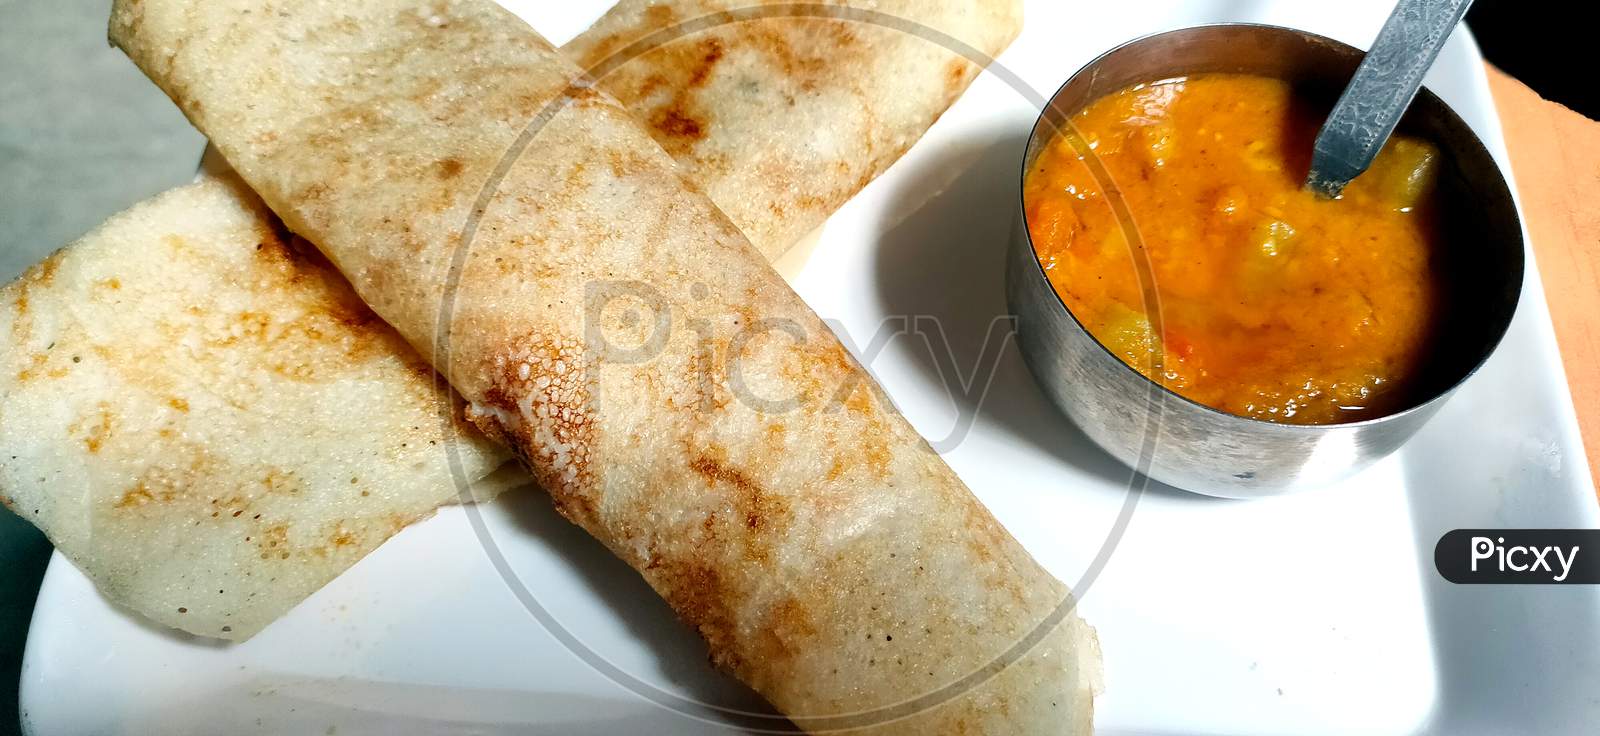 Paper Masala Dosa Is A South Indian Meal Served With Sambhar And Chutney. Selective Focus